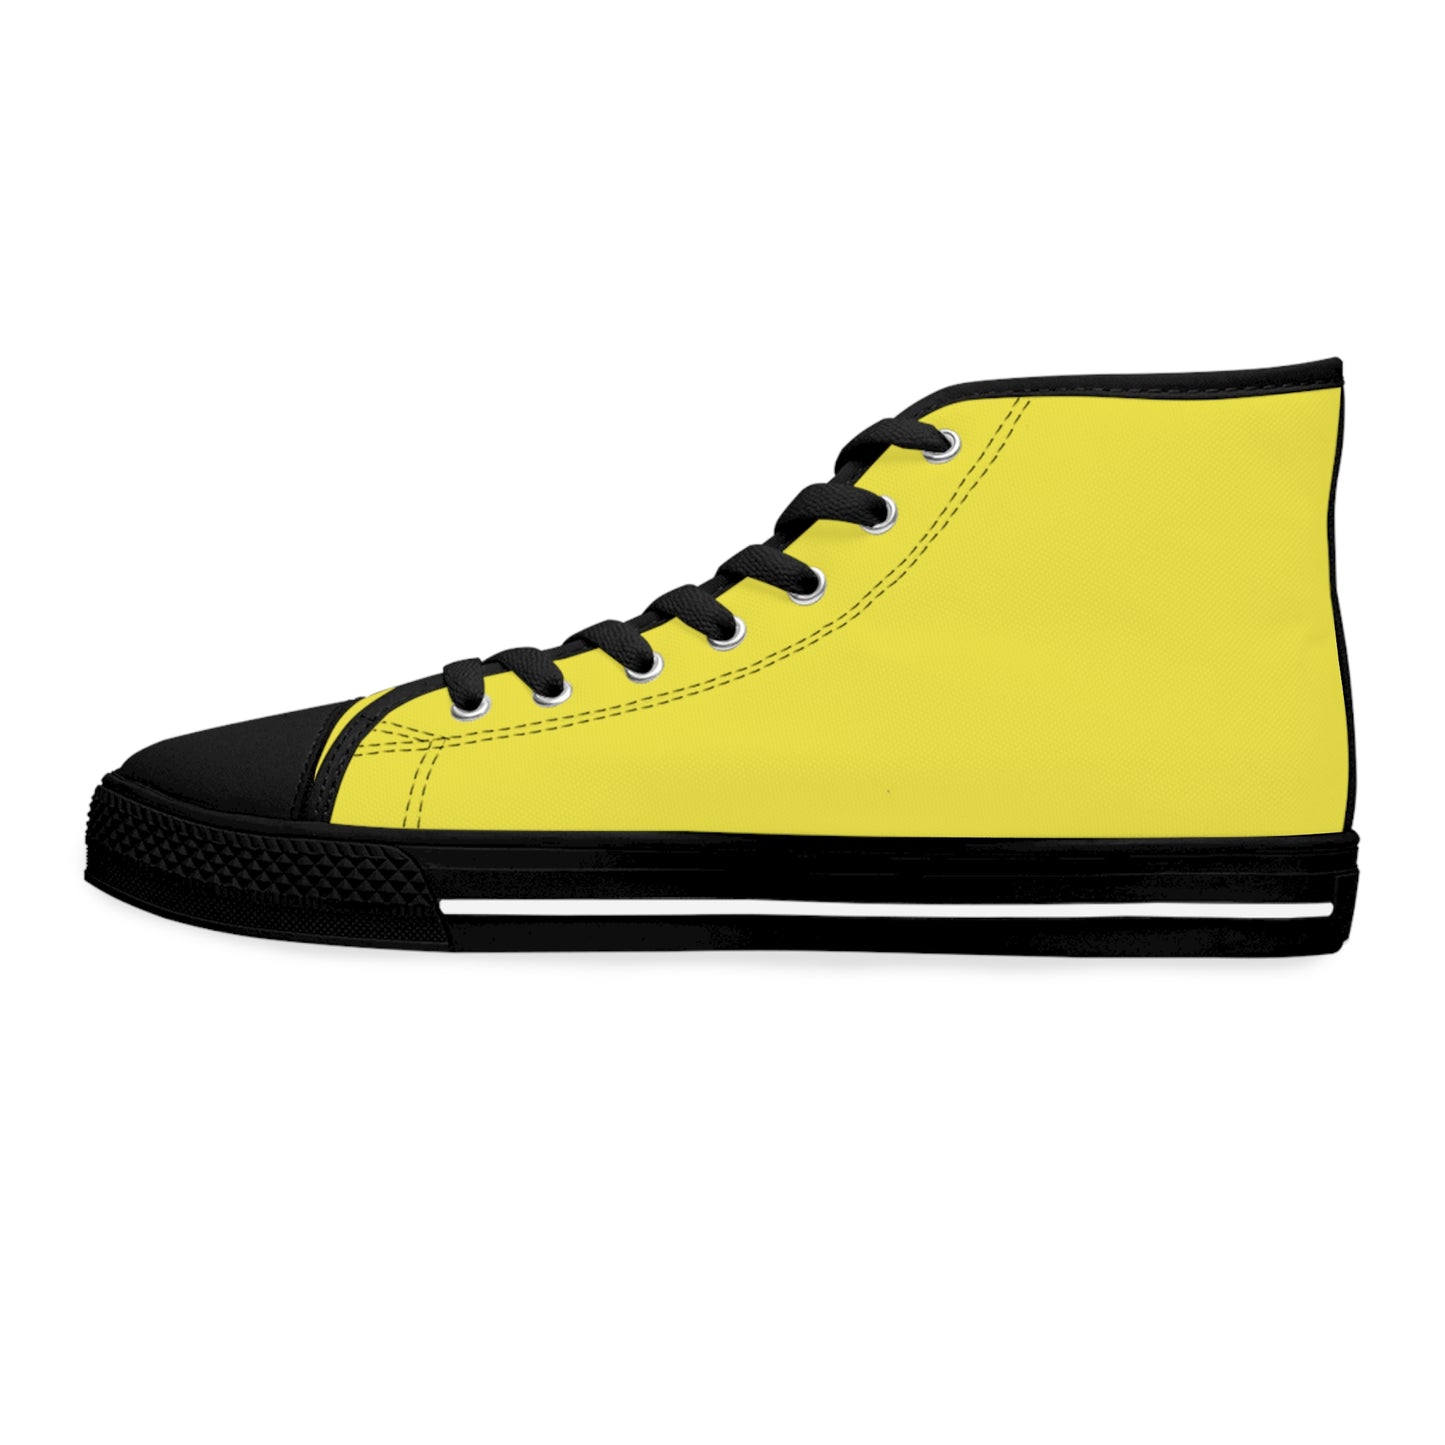 Women's High Top Sneakers - Yellow US 12 White sole